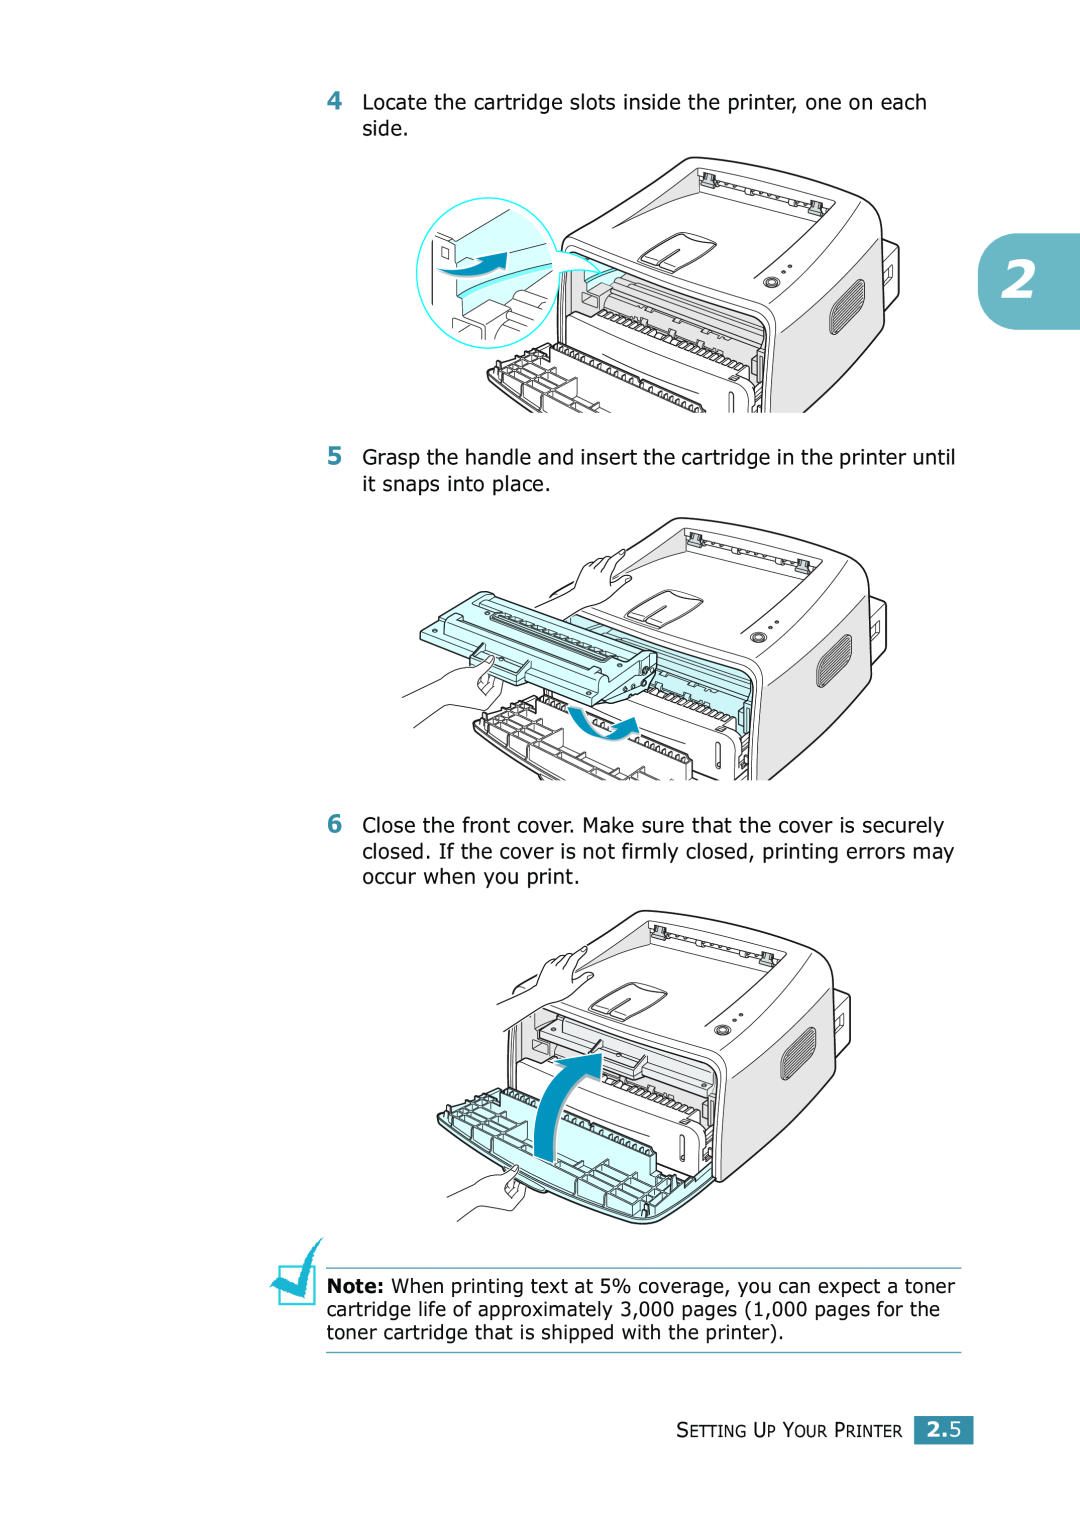 Samsung ML-1520 manual Locate the cartridge slots inside the printer, one on each side 